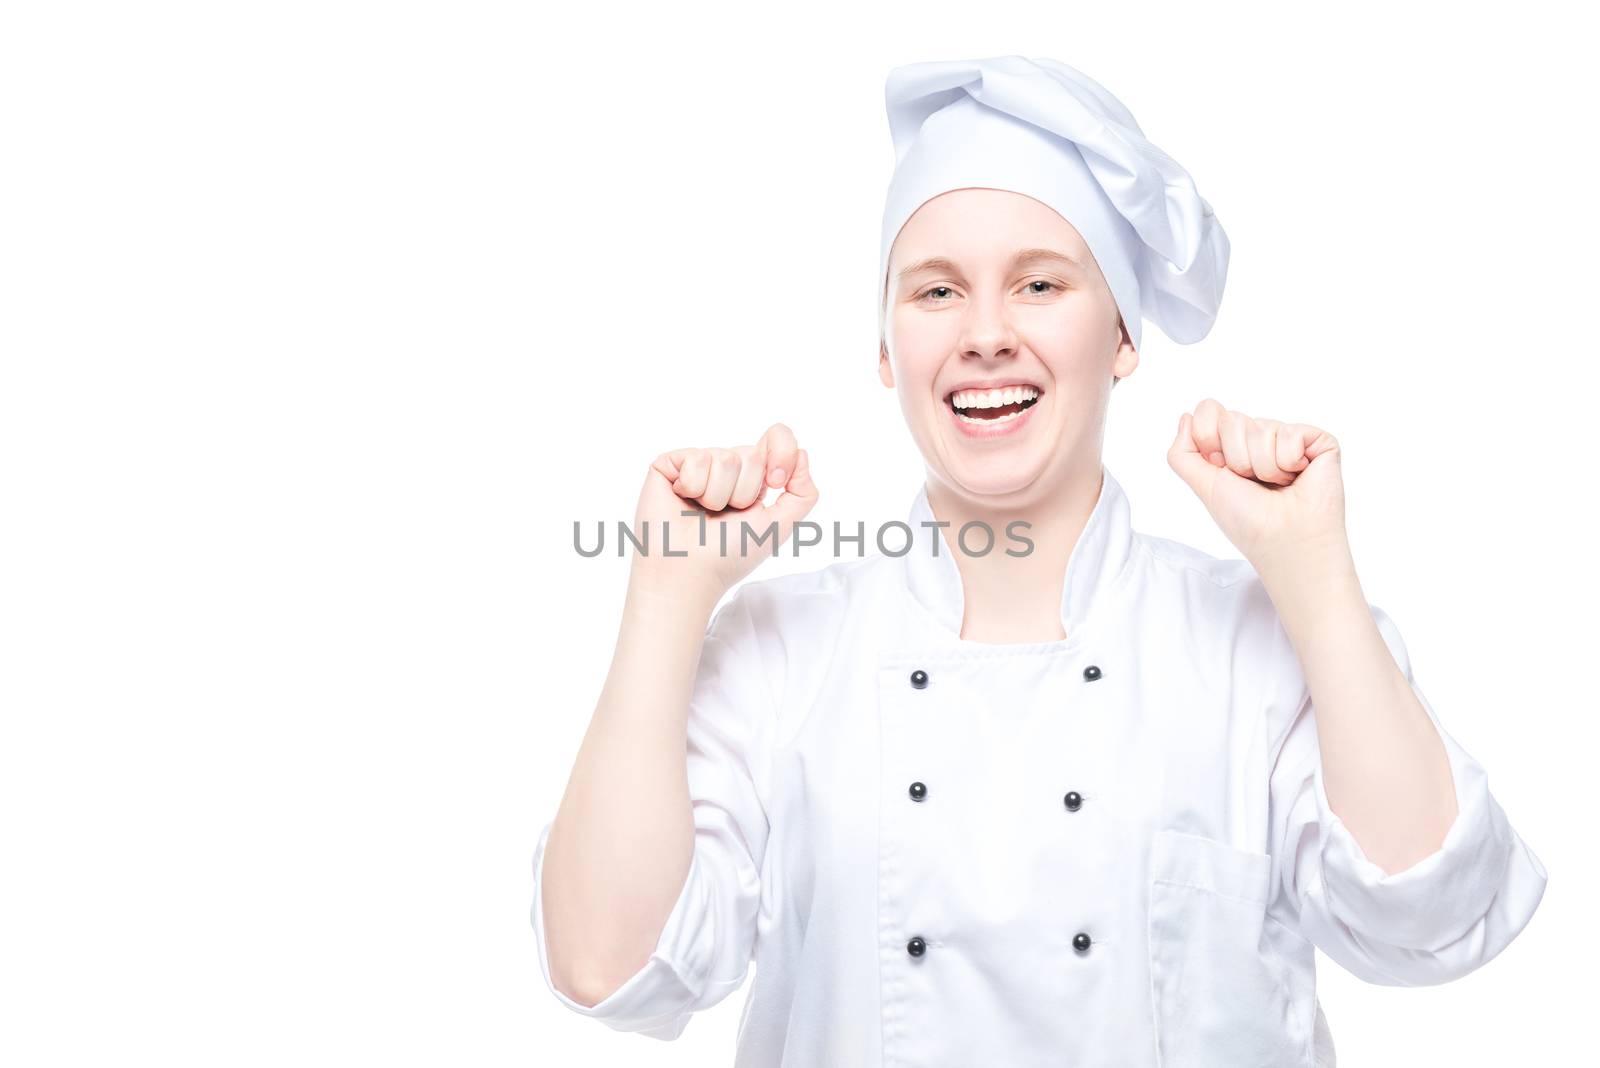 joyful chef in costume rejoices in victory, emotional portrait on white background